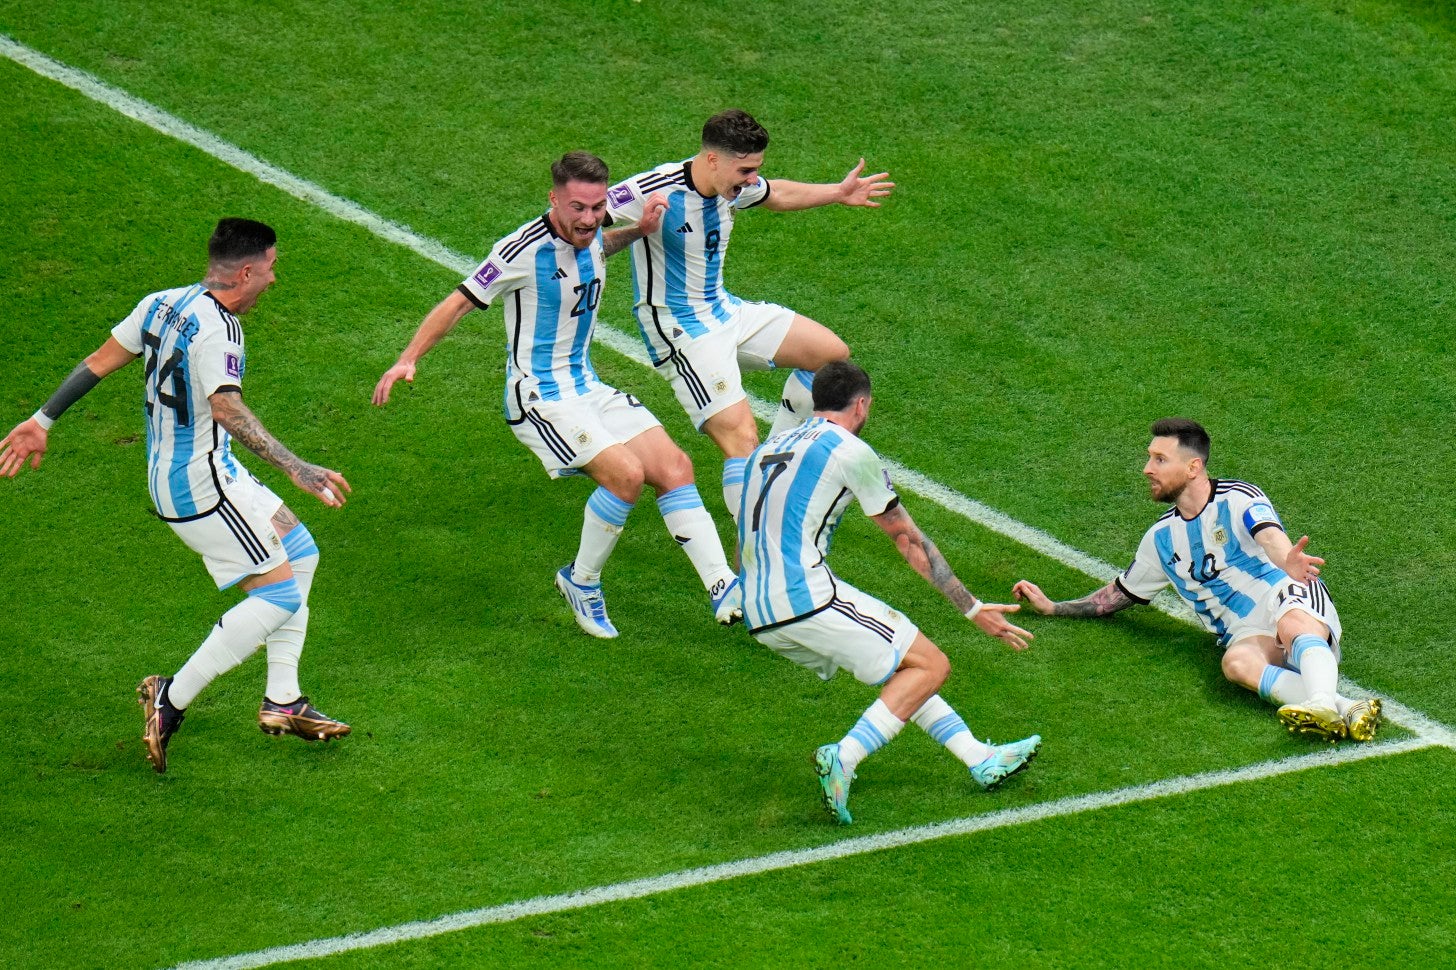 Players surround Messi after he scored